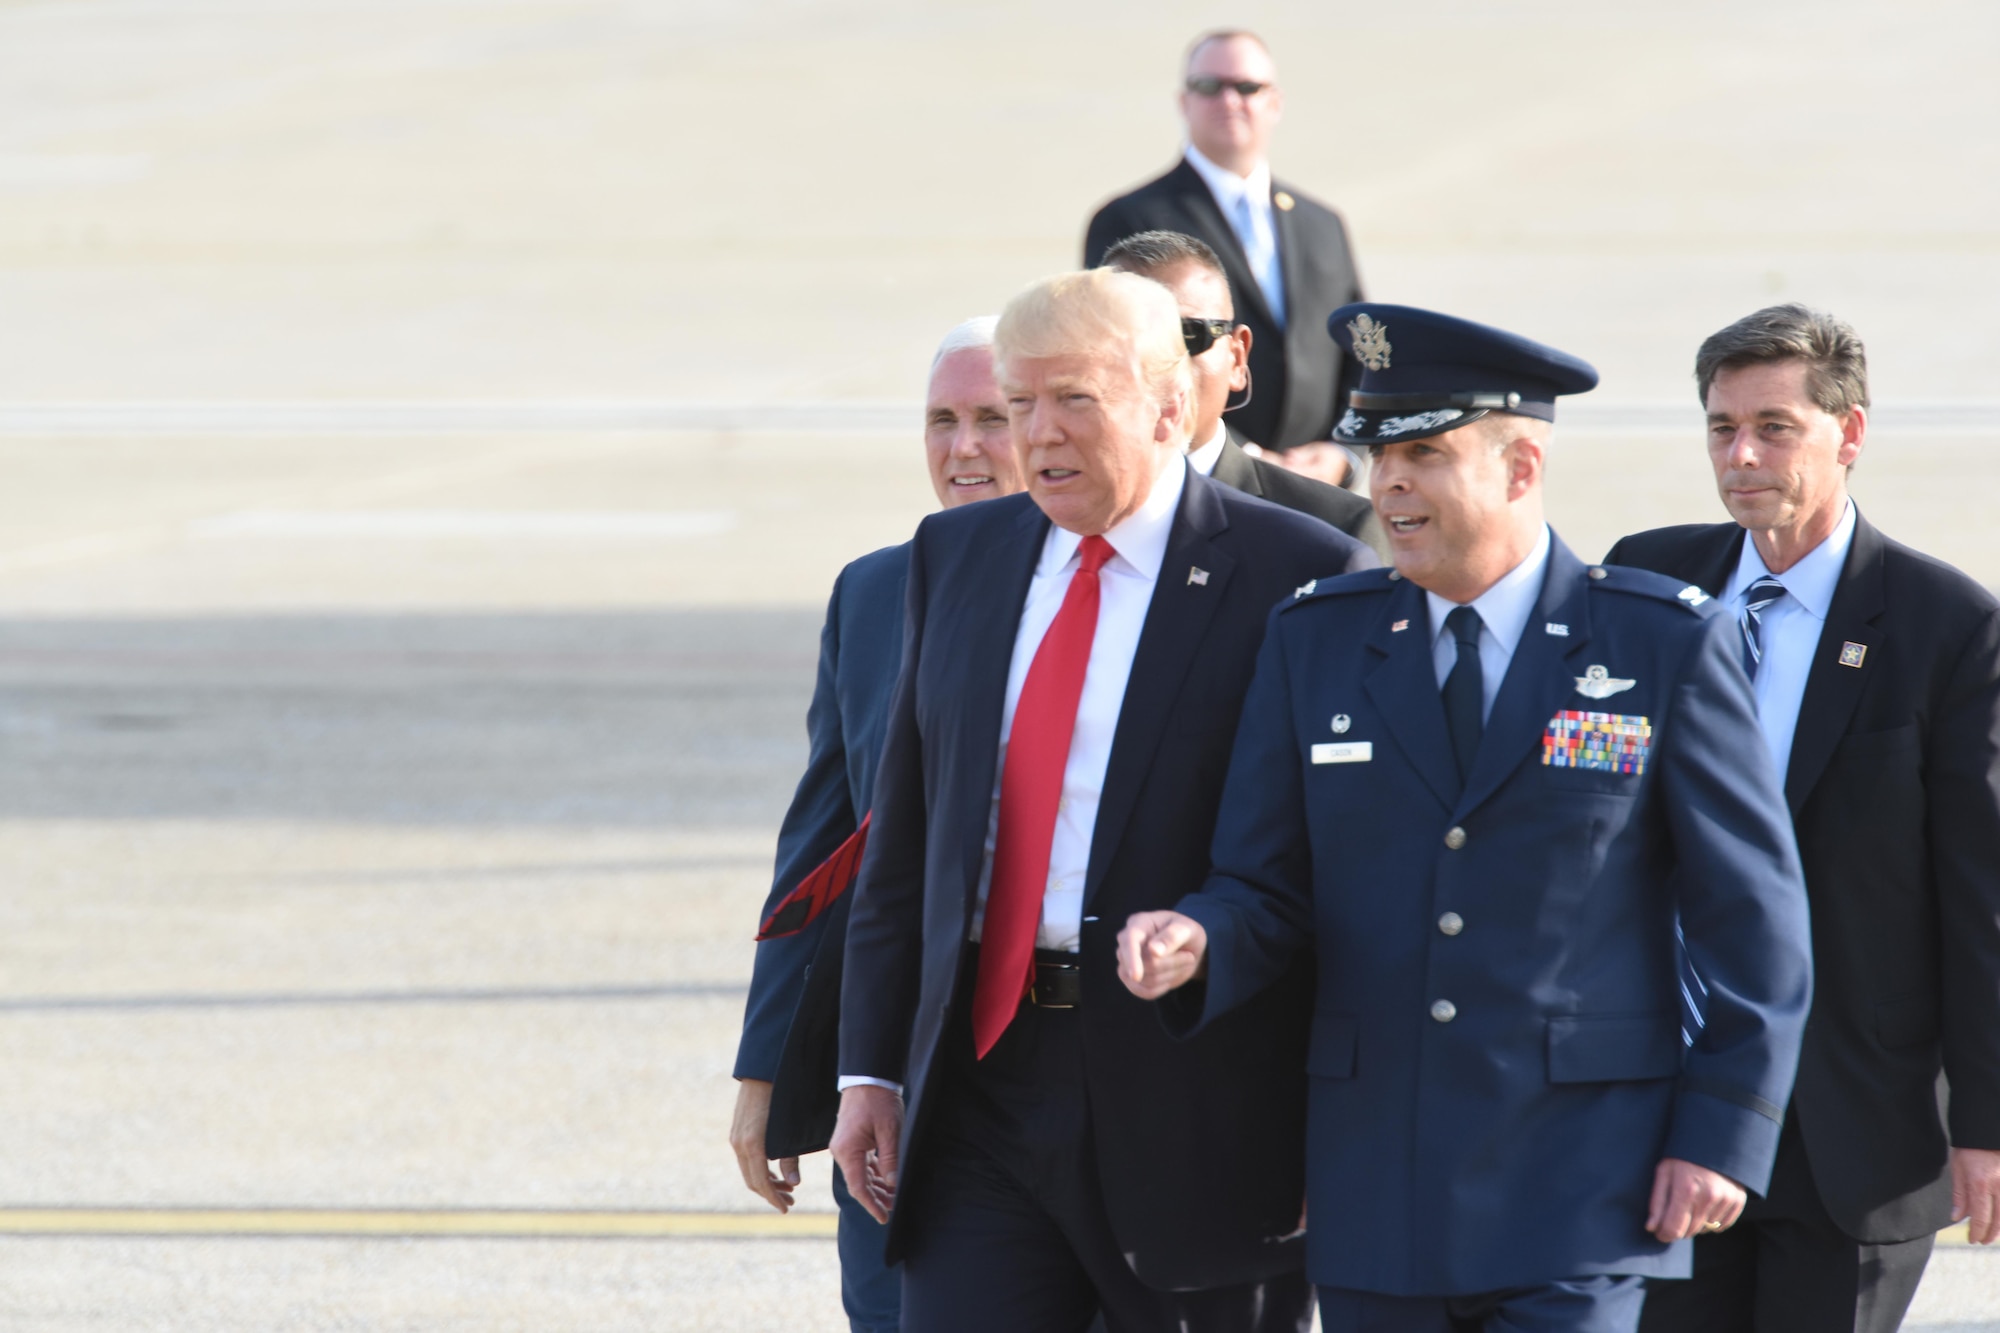 President Donald J. Trump and Vice President Mike Pence walk with 193rd Special Operation Wing Commander Benjamin “Mike” Cason over to 193rd SOW Airmen, and Airmen’s family and friends, to shake their hands, Middletown, Pennsylvania, April 29, 2017. The President and Vice President landed at the 193rd SOW and were on their way the Harrisburg Farm Show Complex for President Trump’s 100th day rally when they made time to greet those that awaited their arrival. (U.S. Air National Guard Photo by Master Sgt. Culeen Shaffer/Released)